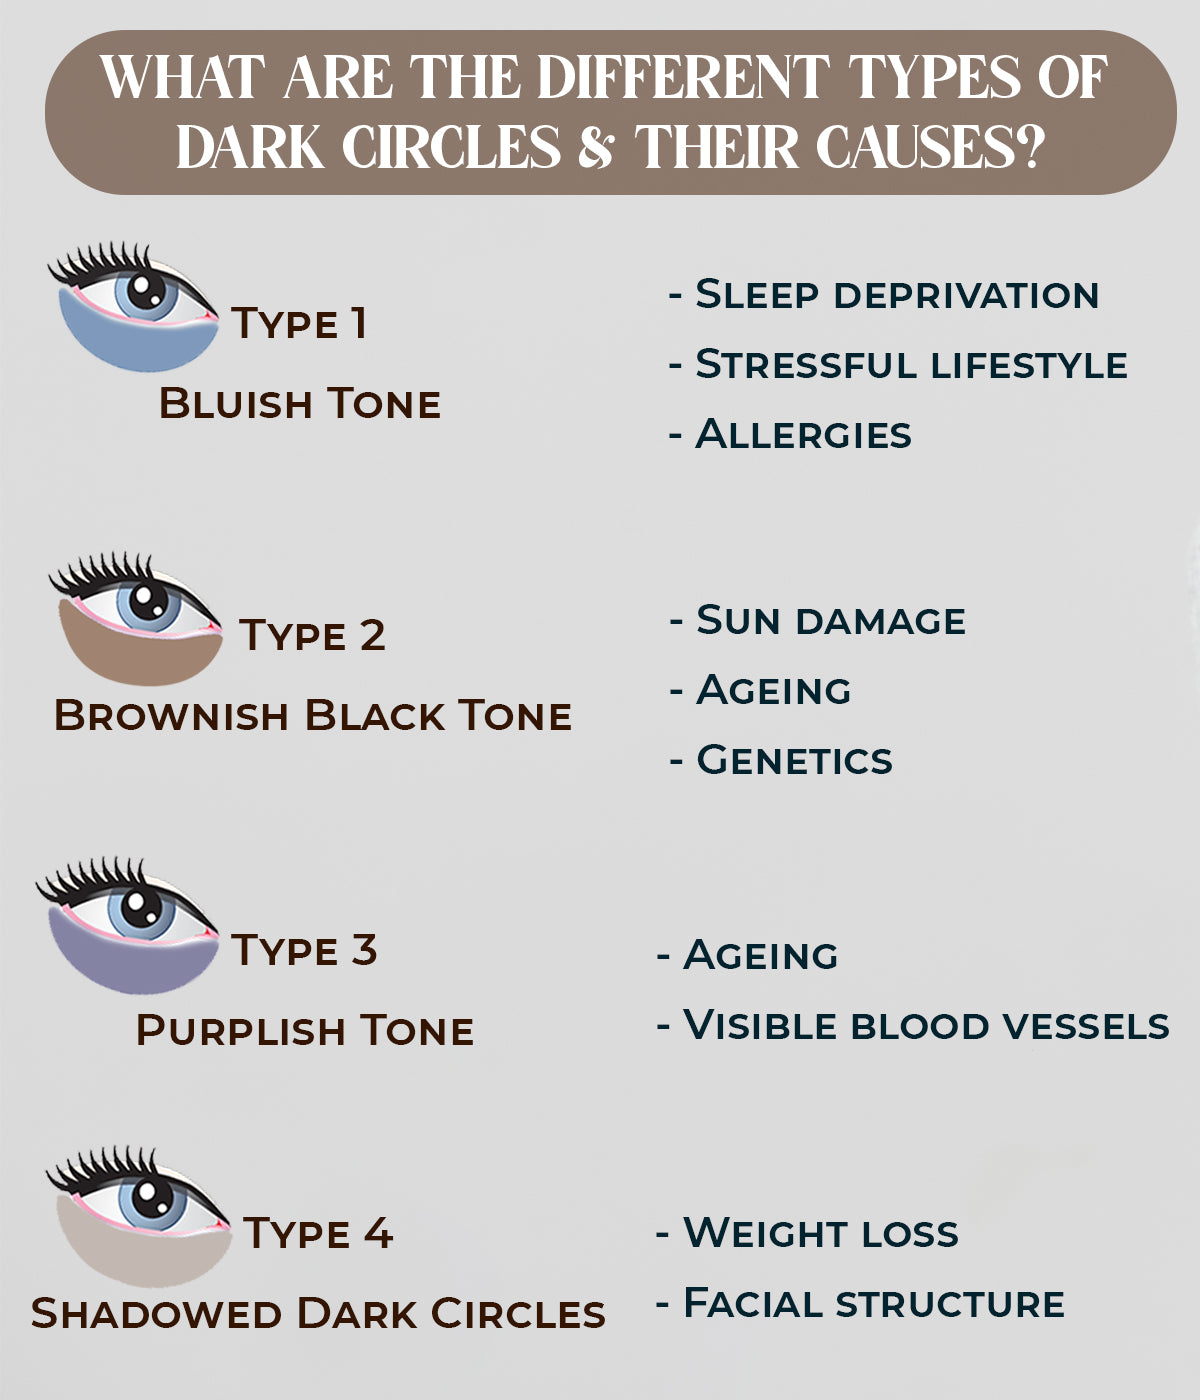 This is an image of what are the different types of dark circles and their causes